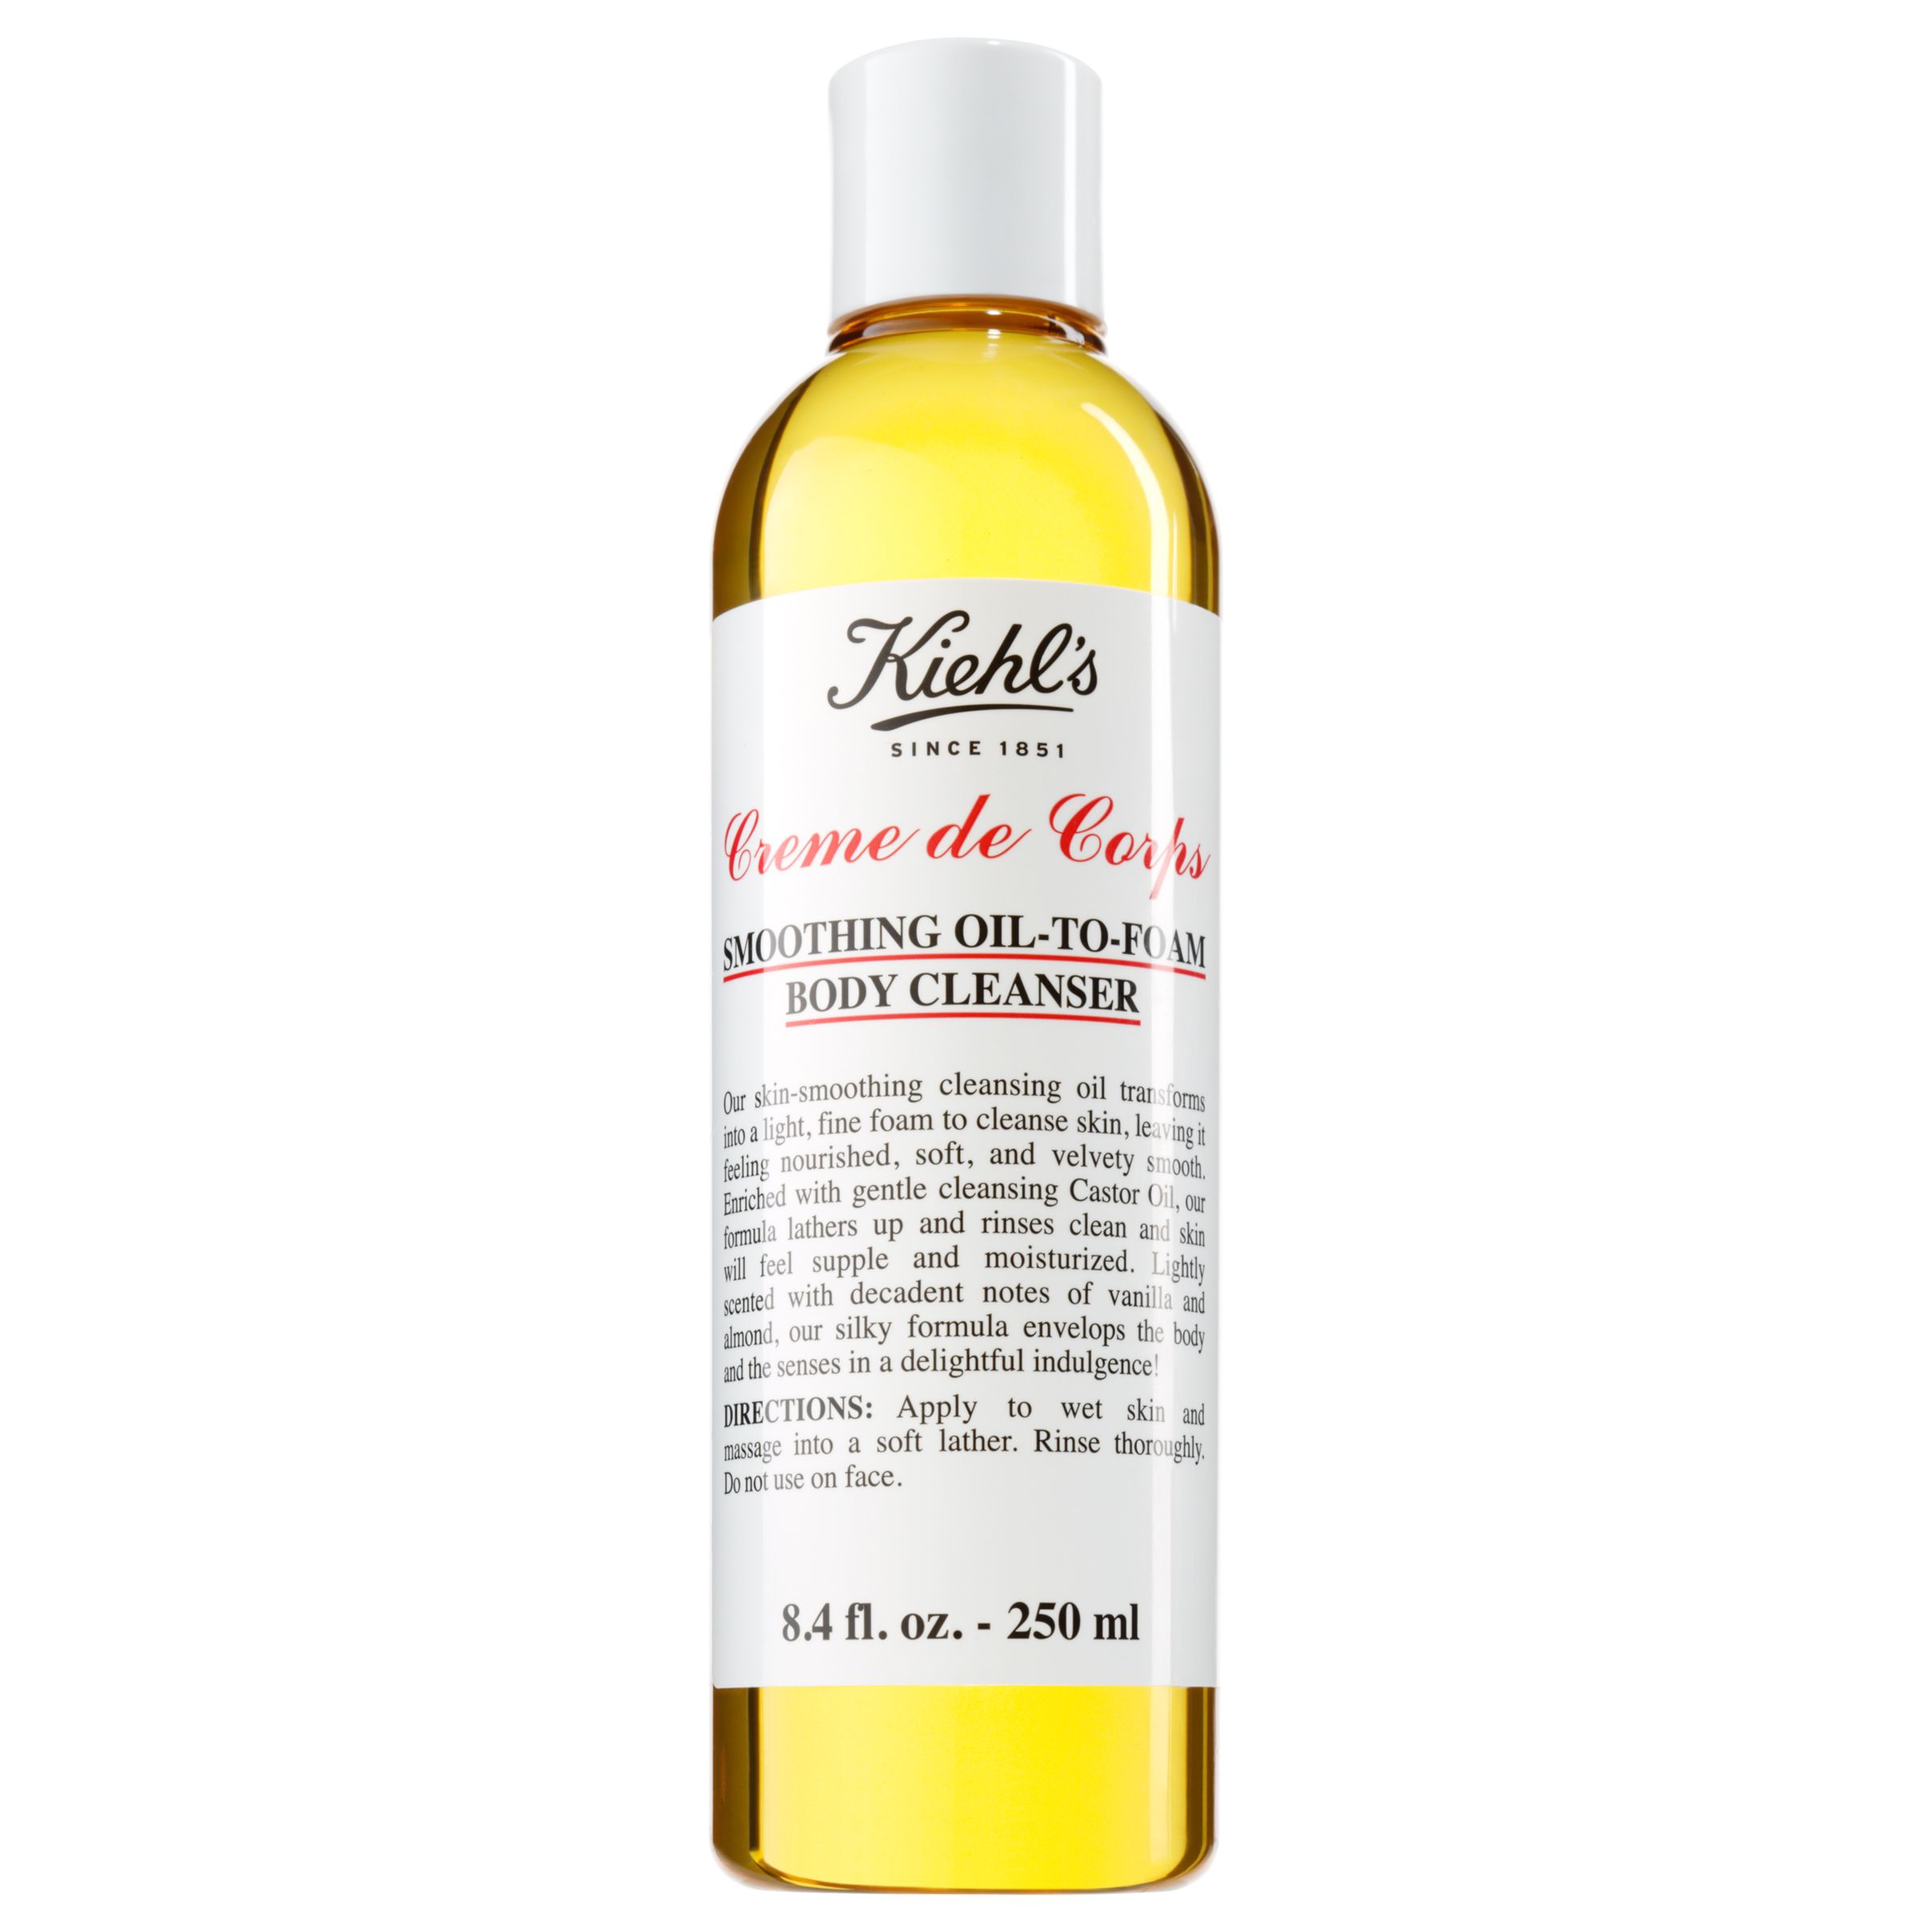 Kiehl's Creme de Corps Smoothing Oil-To-Foam Body Cleanser, 250ml 1